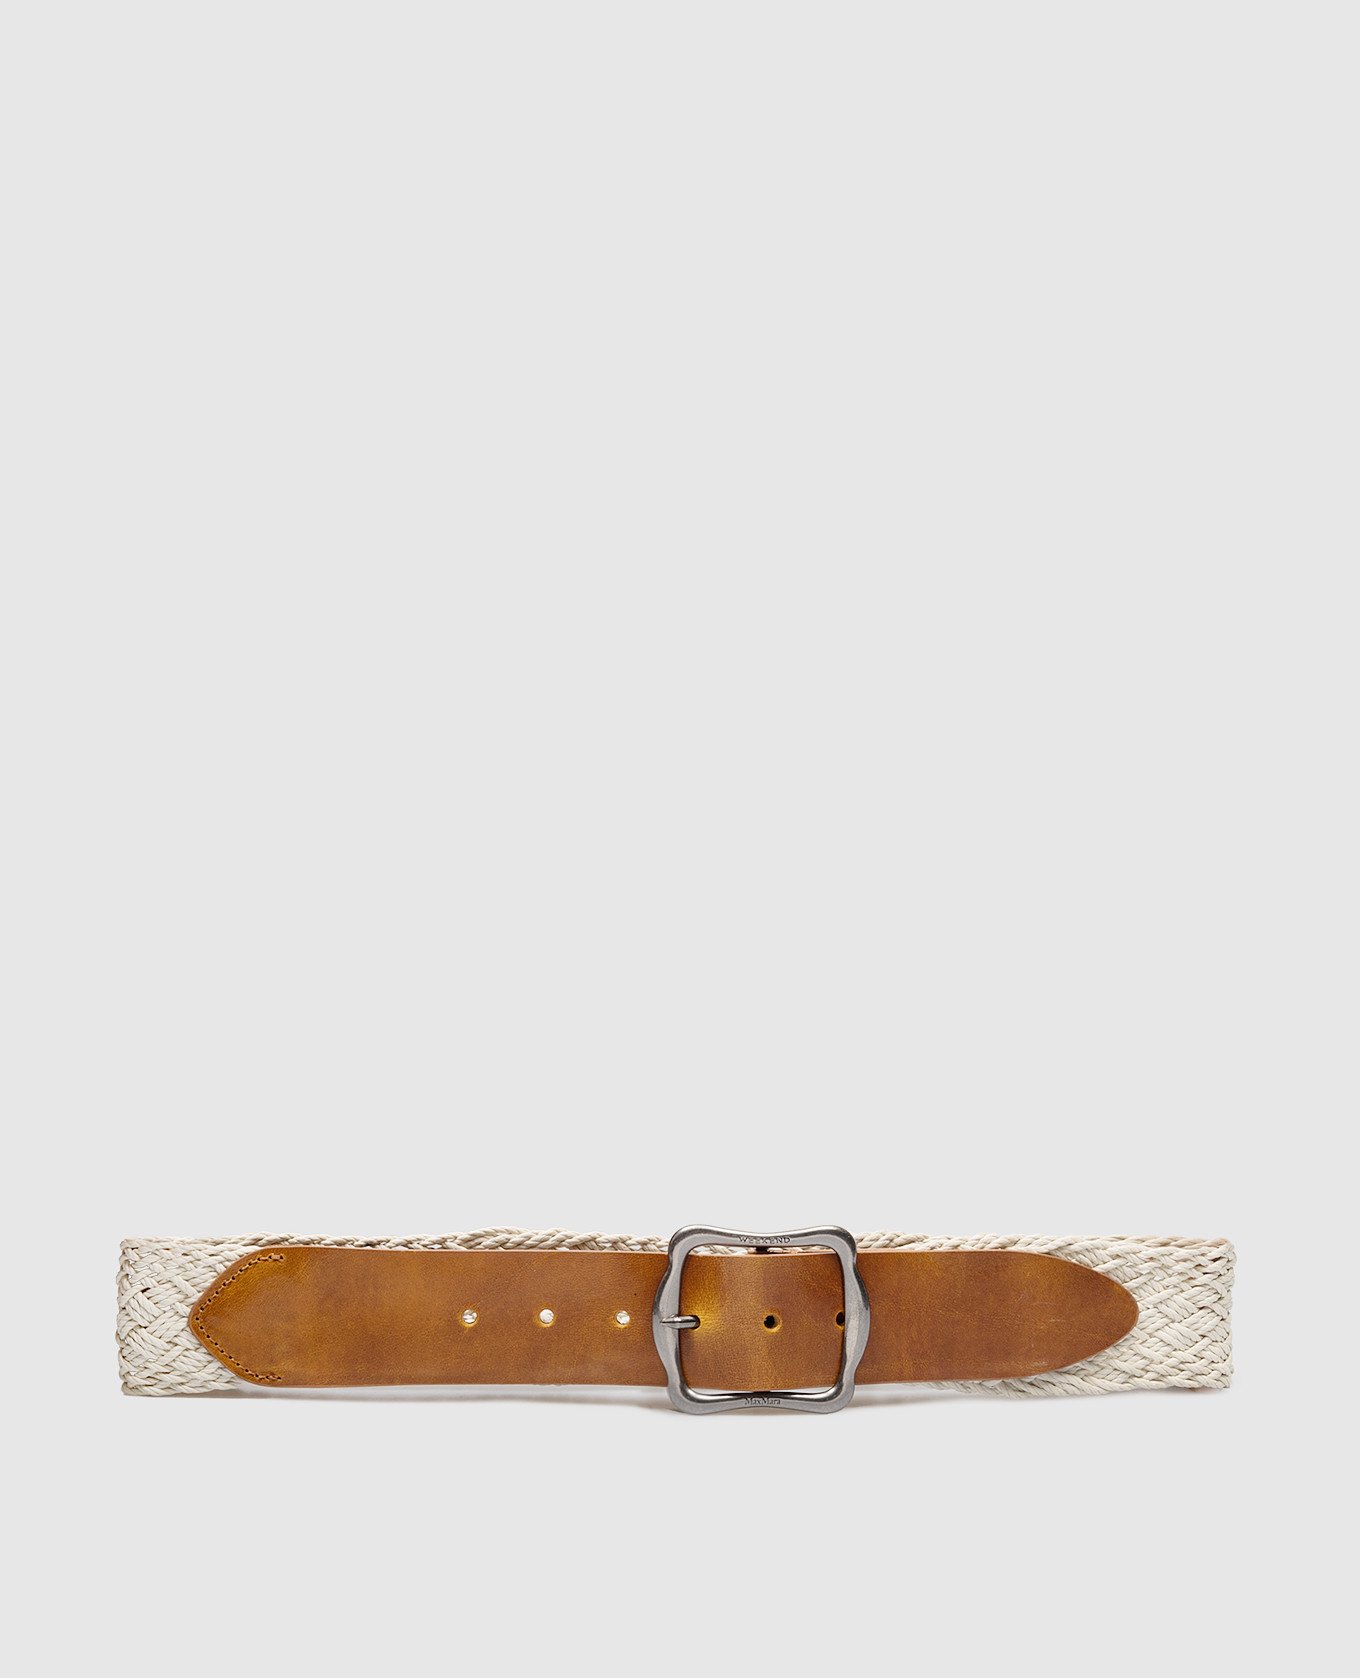 MASSIMO beige woven belt with logo engraving